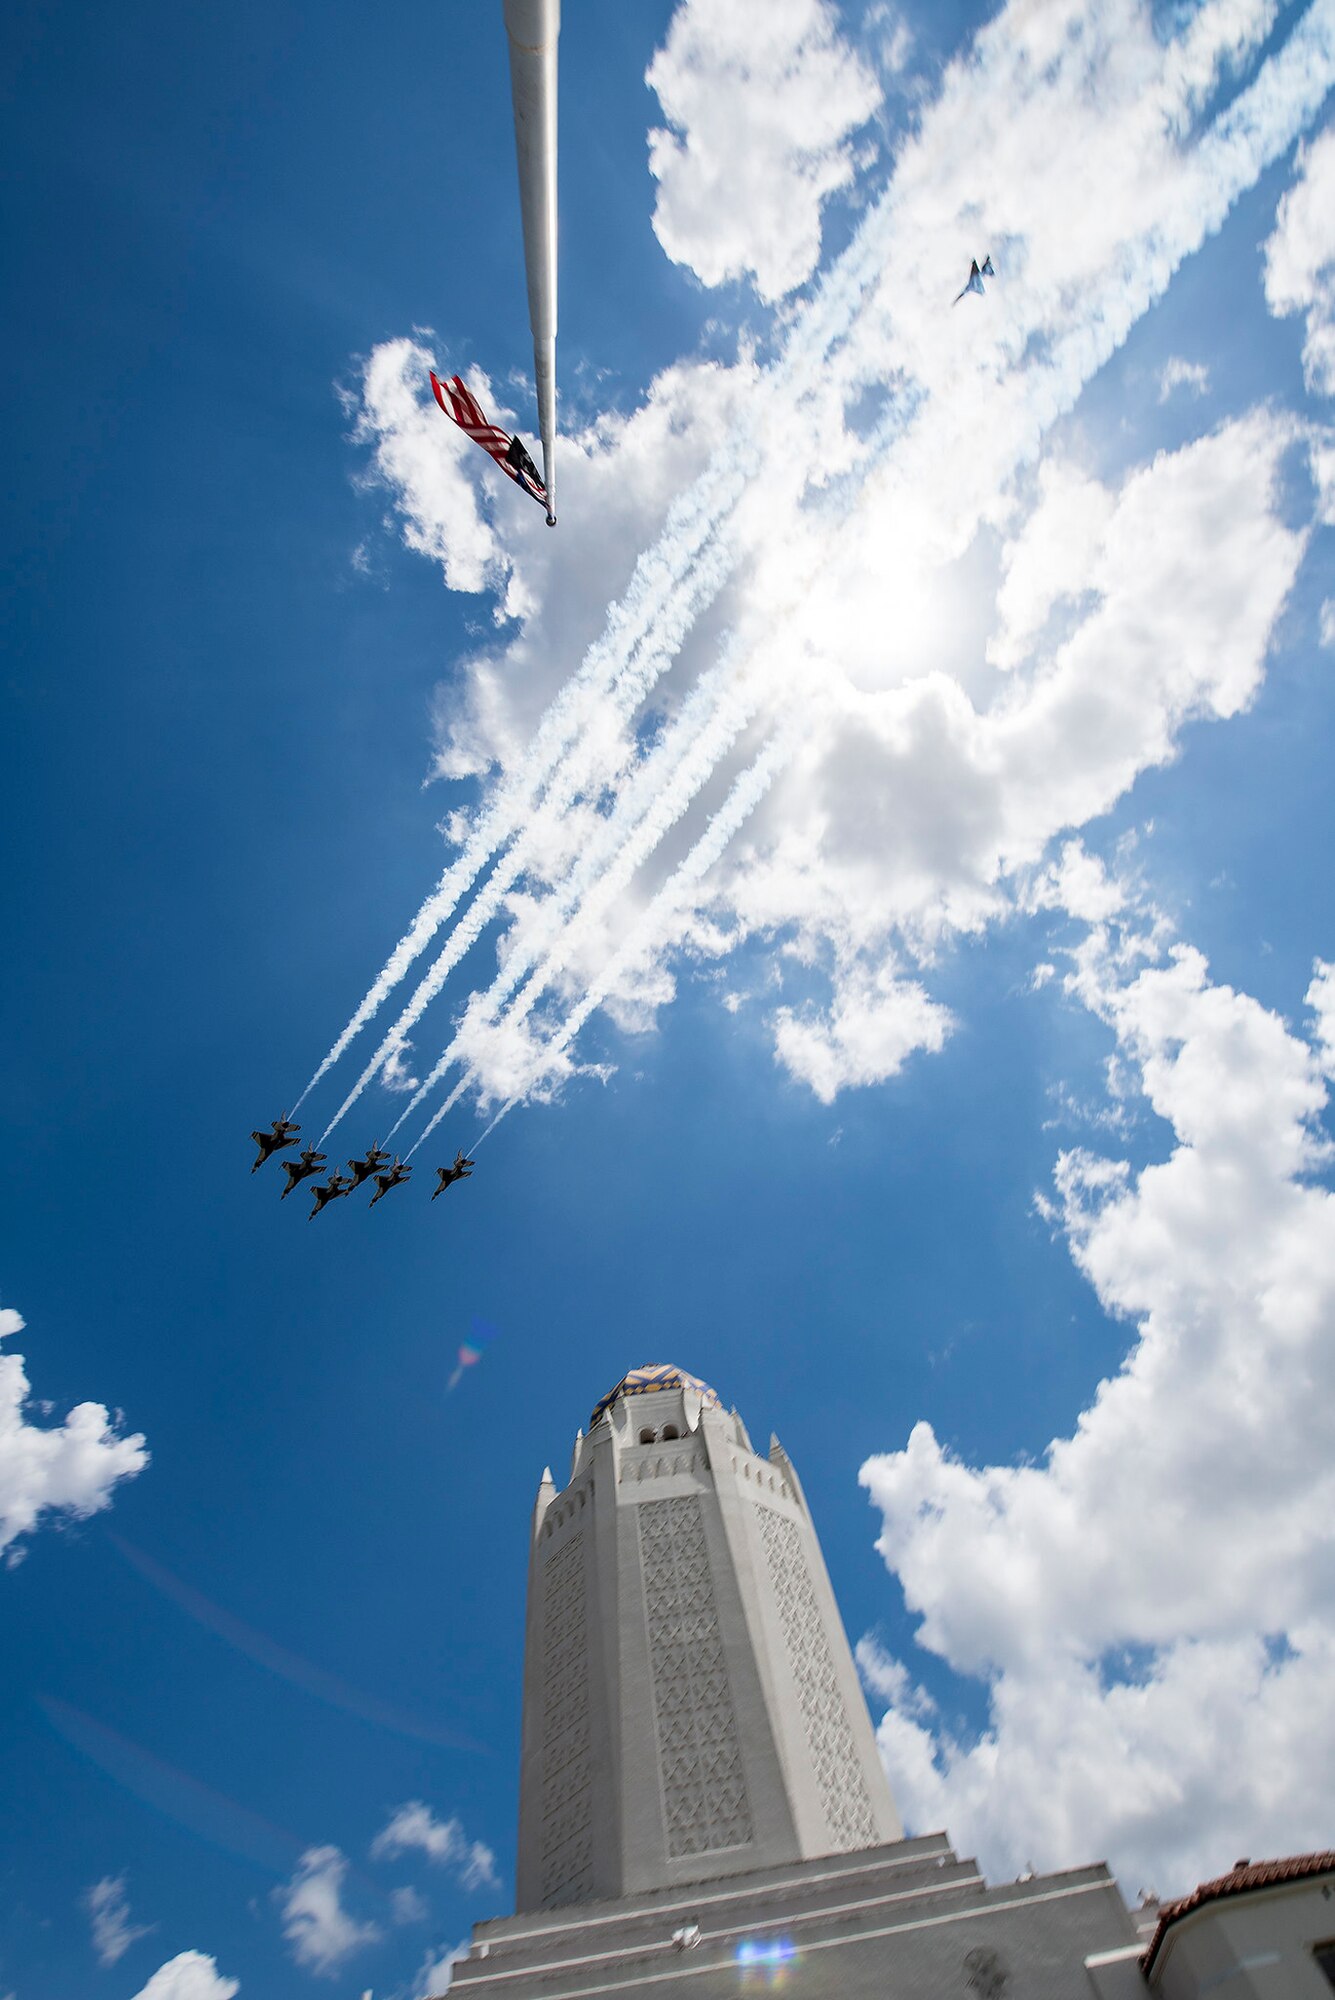 The United States Air Force Air Demonstration Squadron “Thunderbirds” fly over the Taj Mahal at Joint Base San Antonio-Randolph during their America Strong salute May 13.